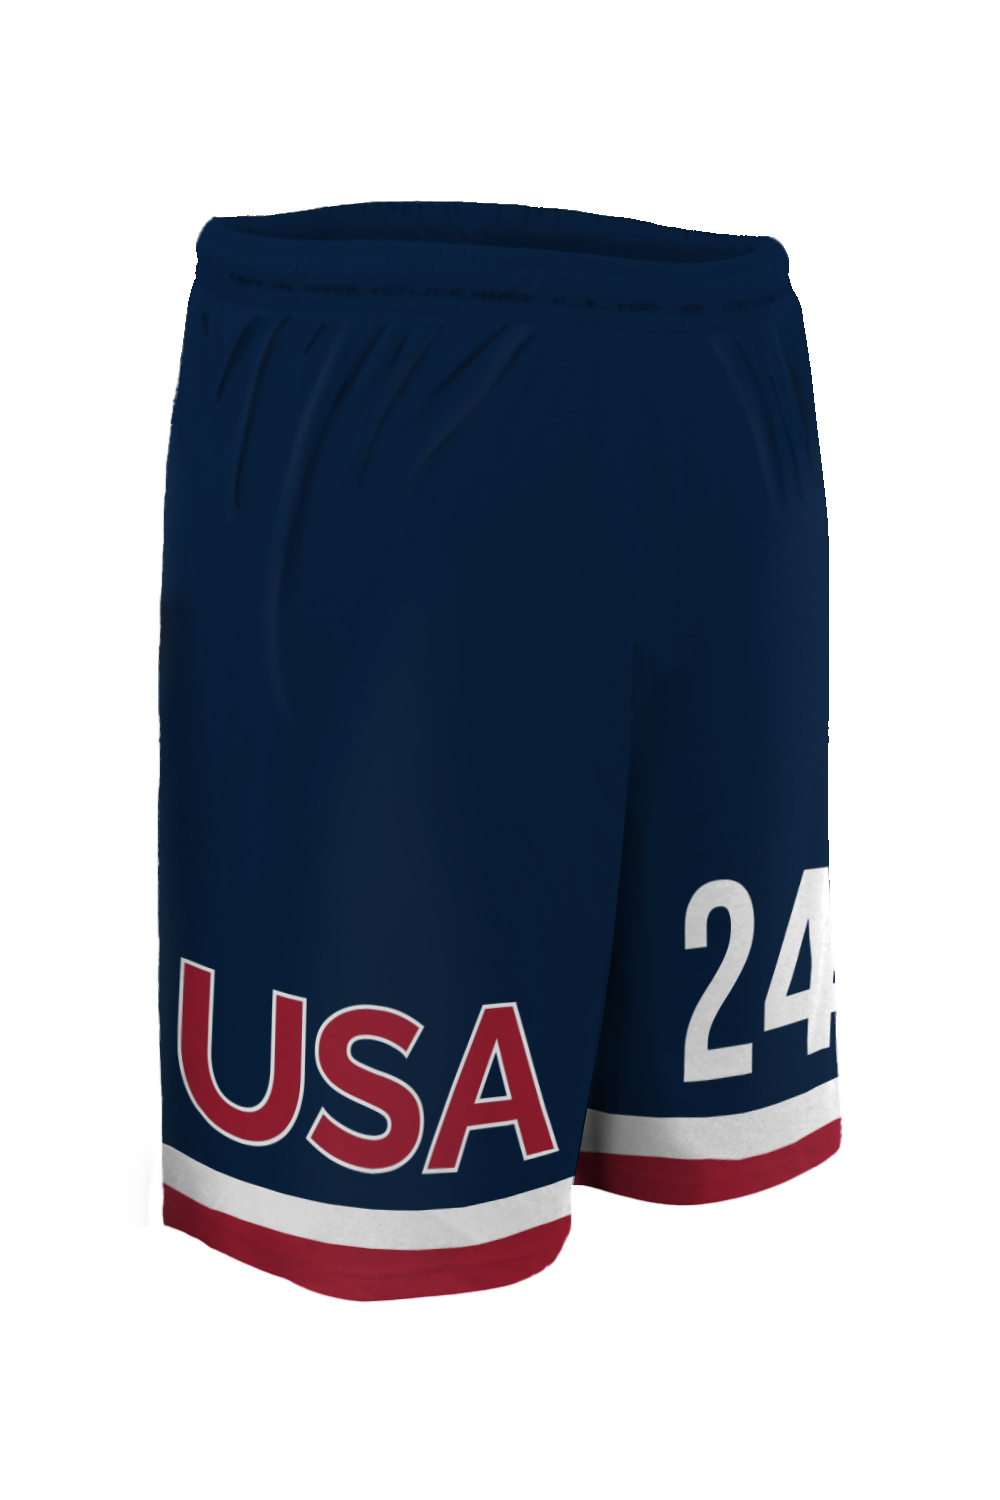 USNT Micro Shorts (Fans)